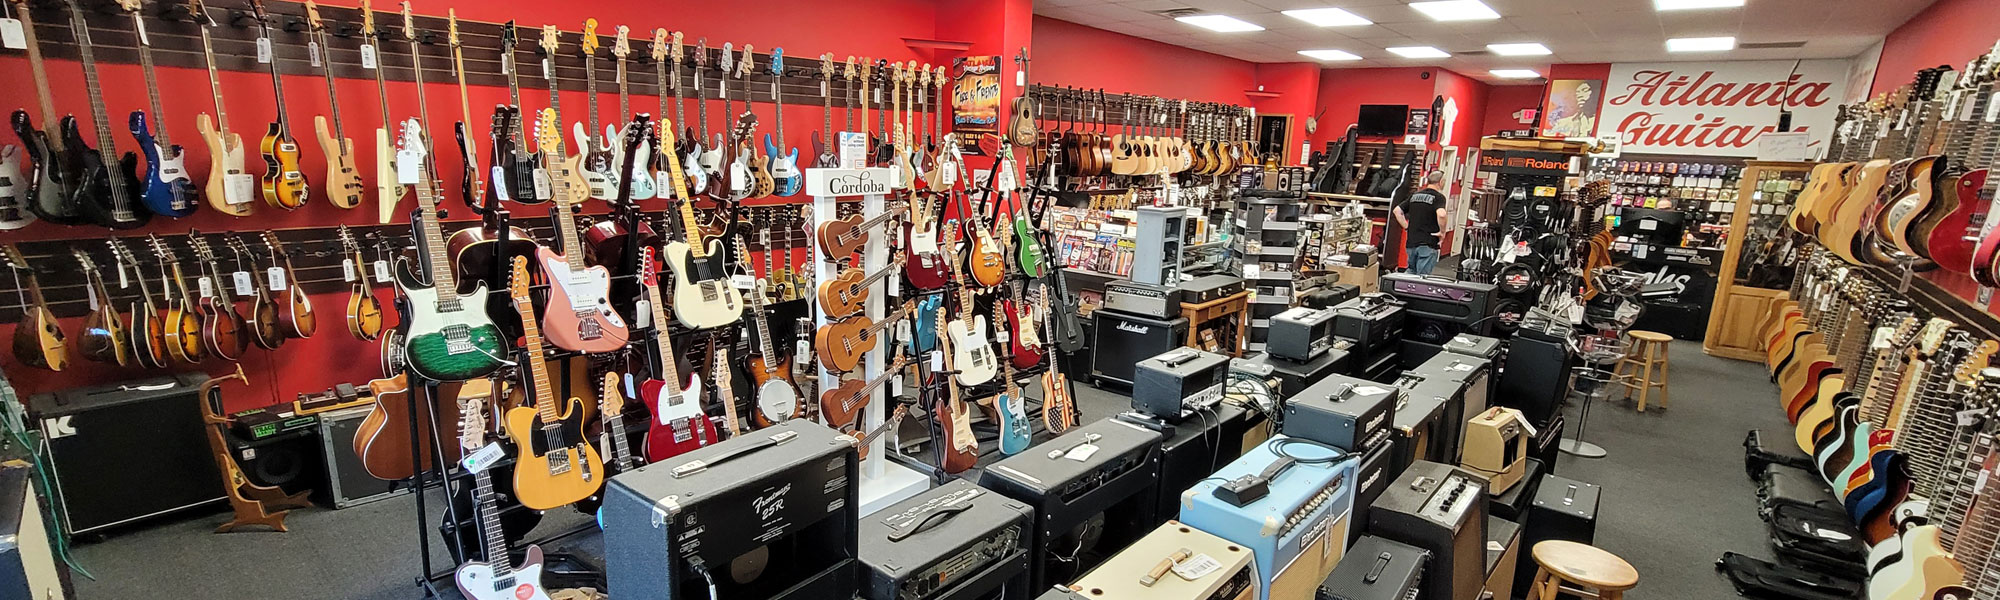 Inside Atlanta Vintage Guitars showing guitars on display and other merchandise on walls